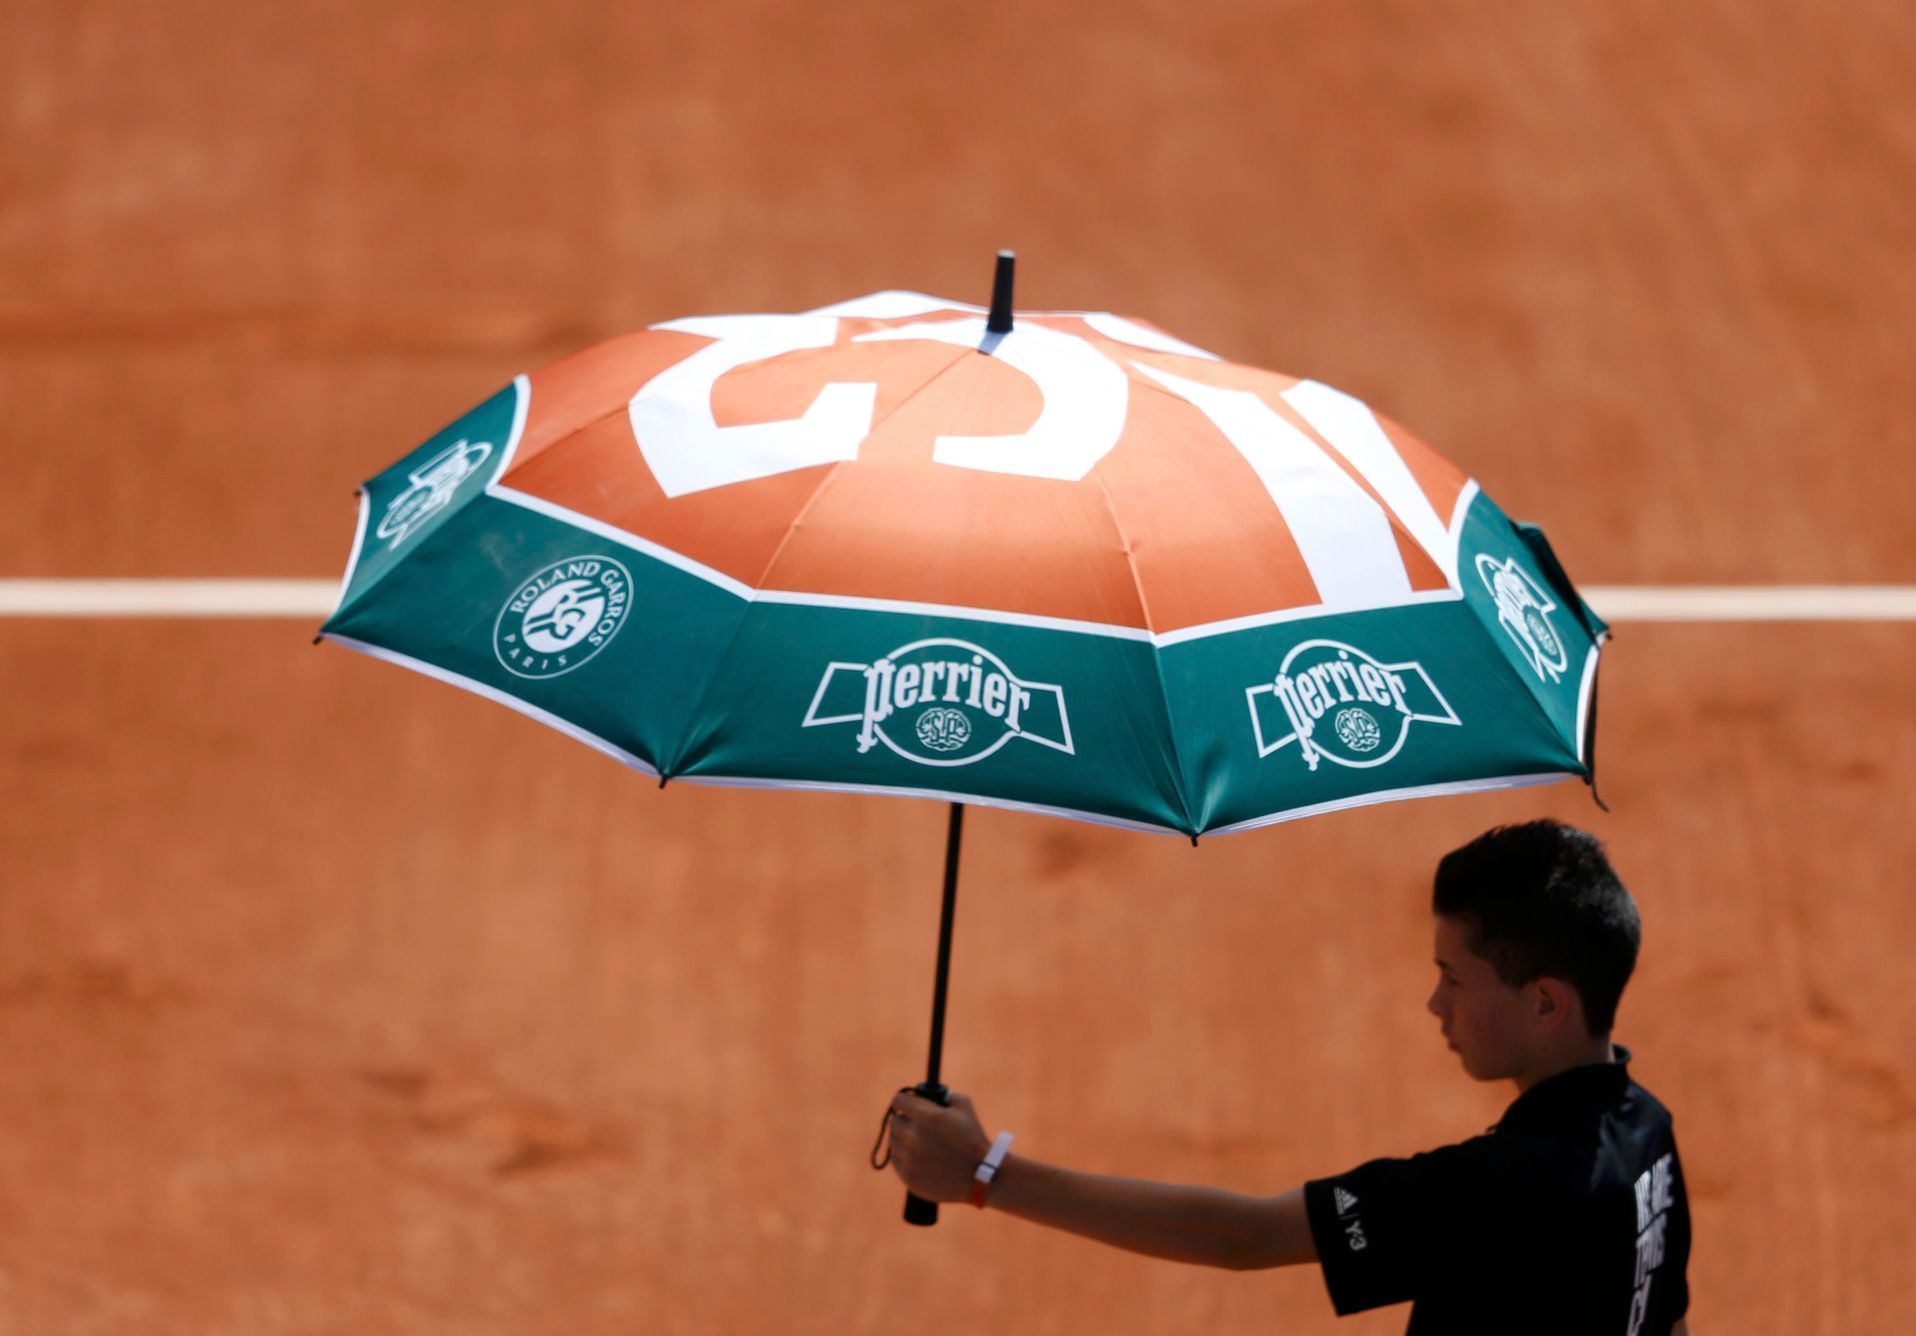 A court boy holds an umbrella during the women's singles match betwween Simona Halep of Romania and Evgeniya Rodina of Russia at the French Open tennis tournament at the Roland Garros stadium in Paris